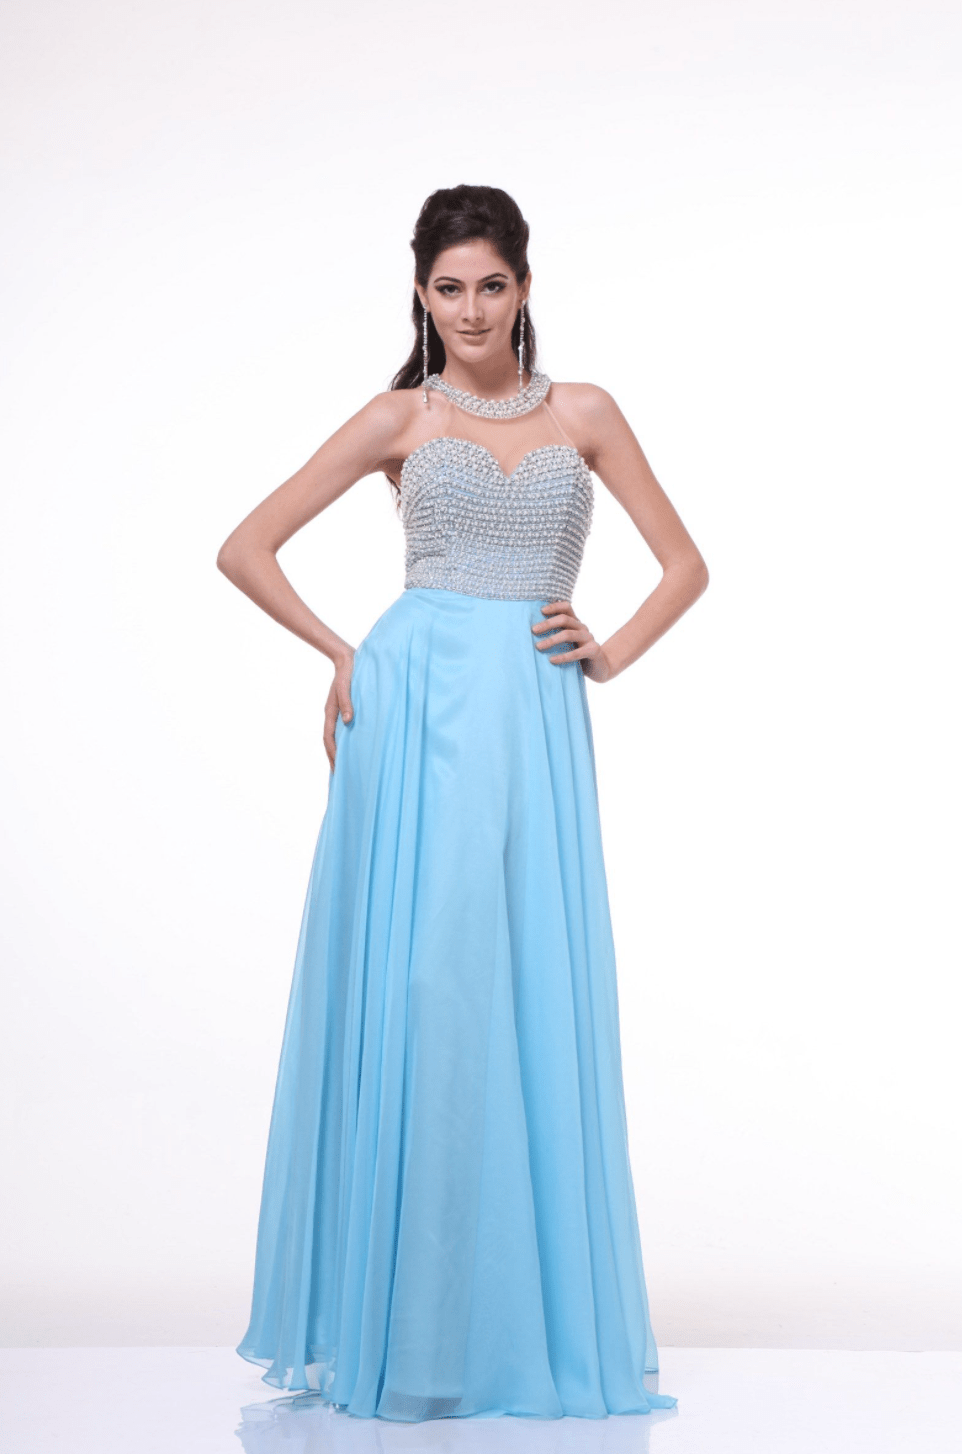 Sparkling Halter Style Chiffon Dress By Cinderella Divine - NORMA REED